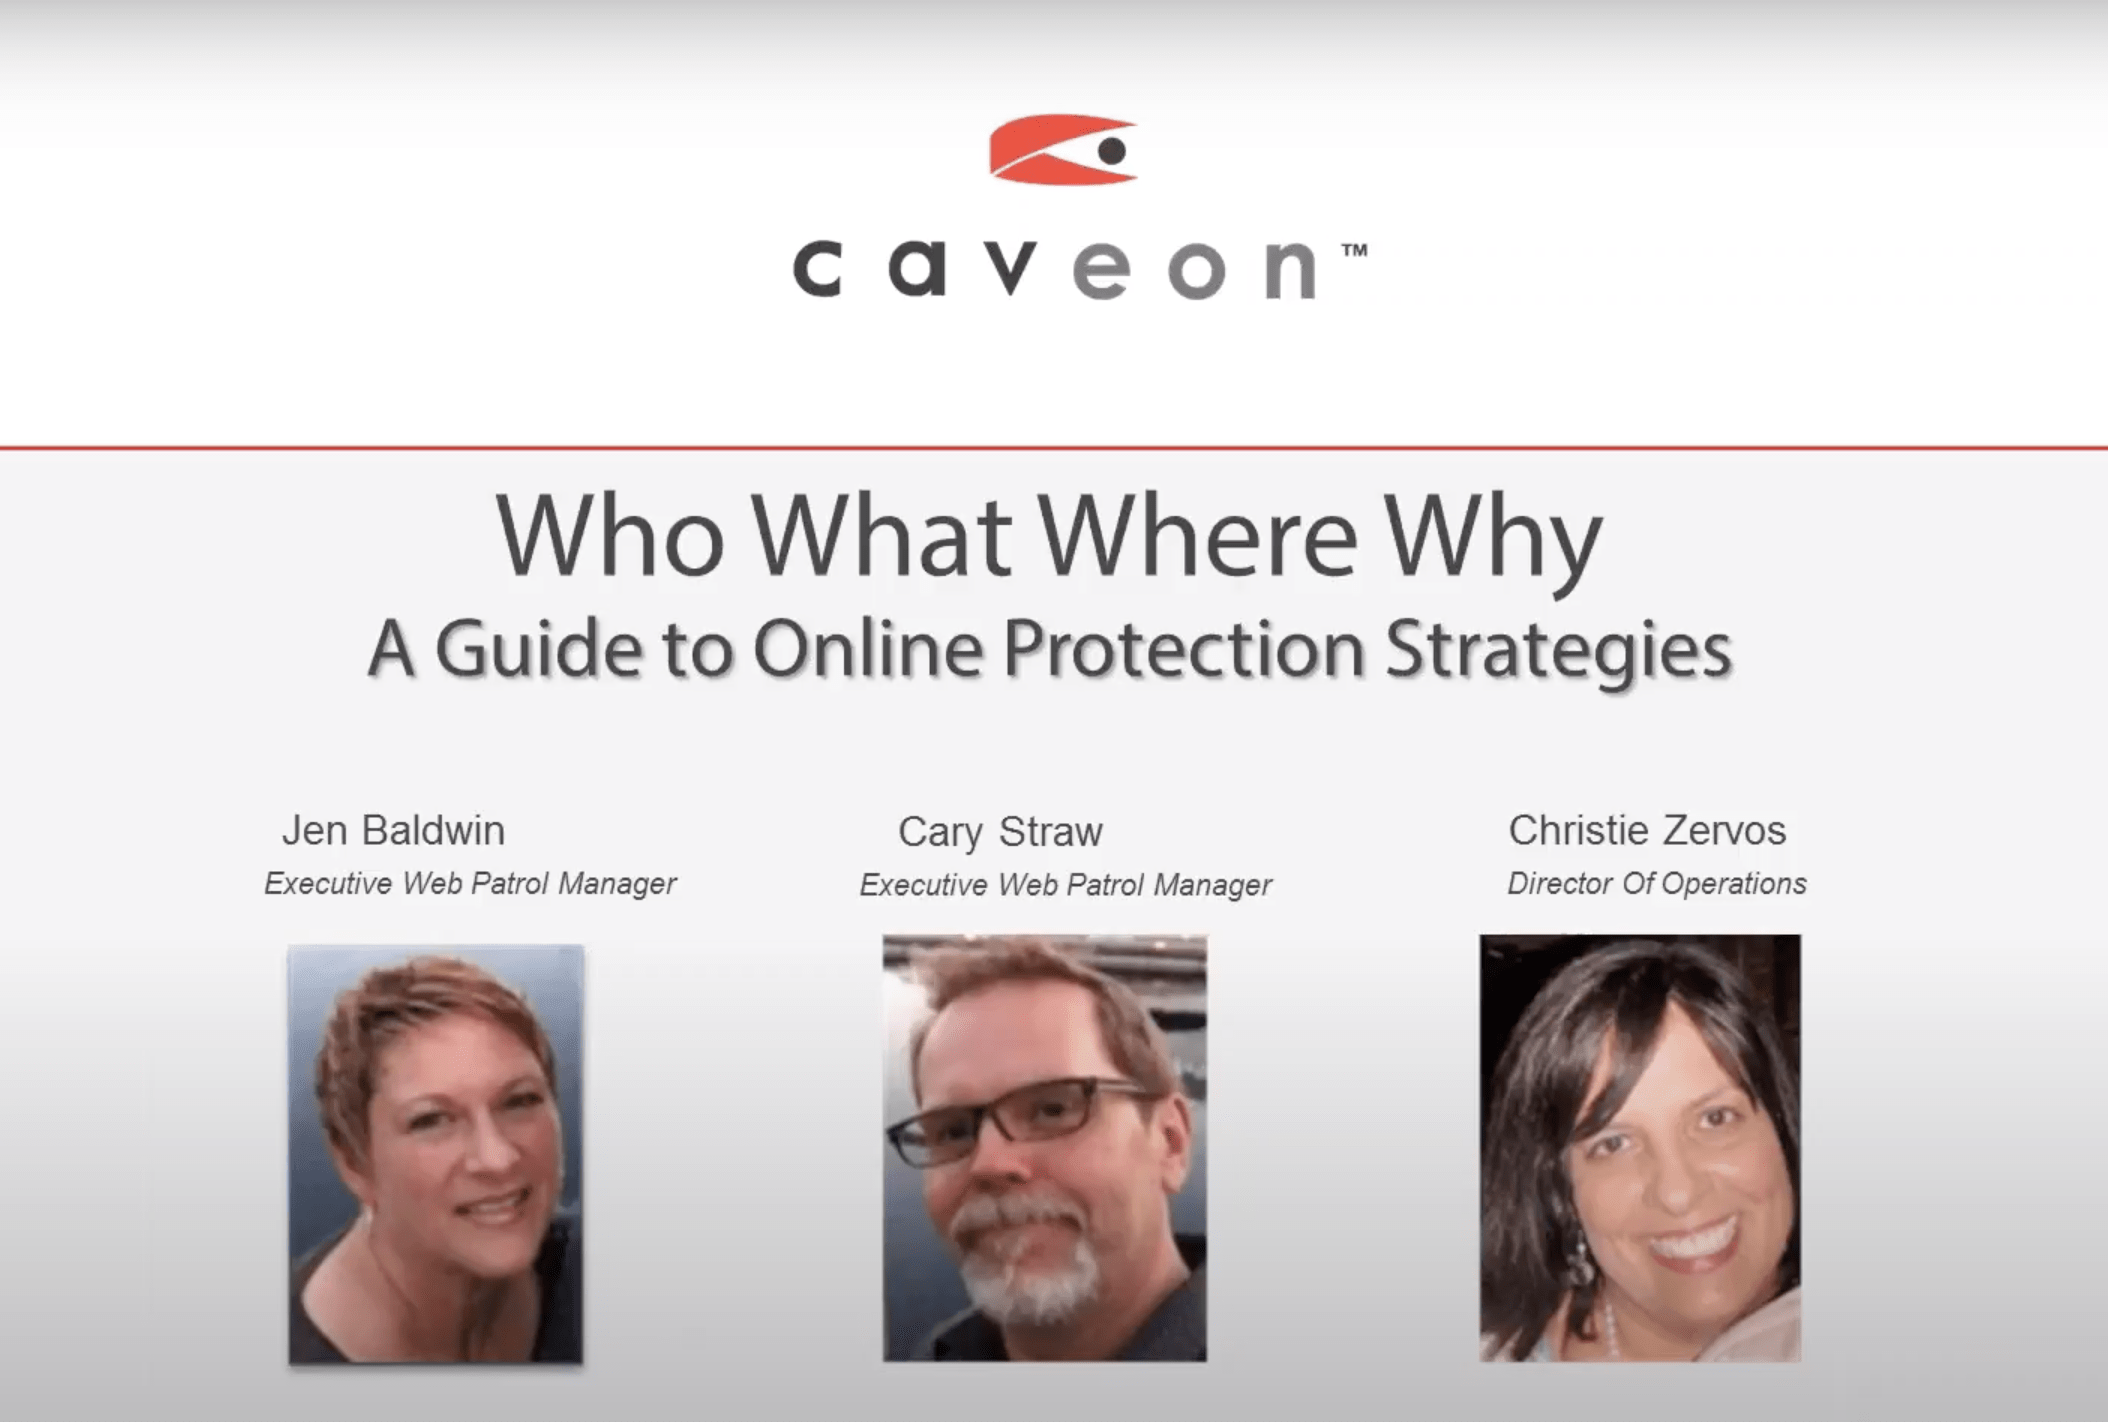 A Guide to Online Protection Strategies